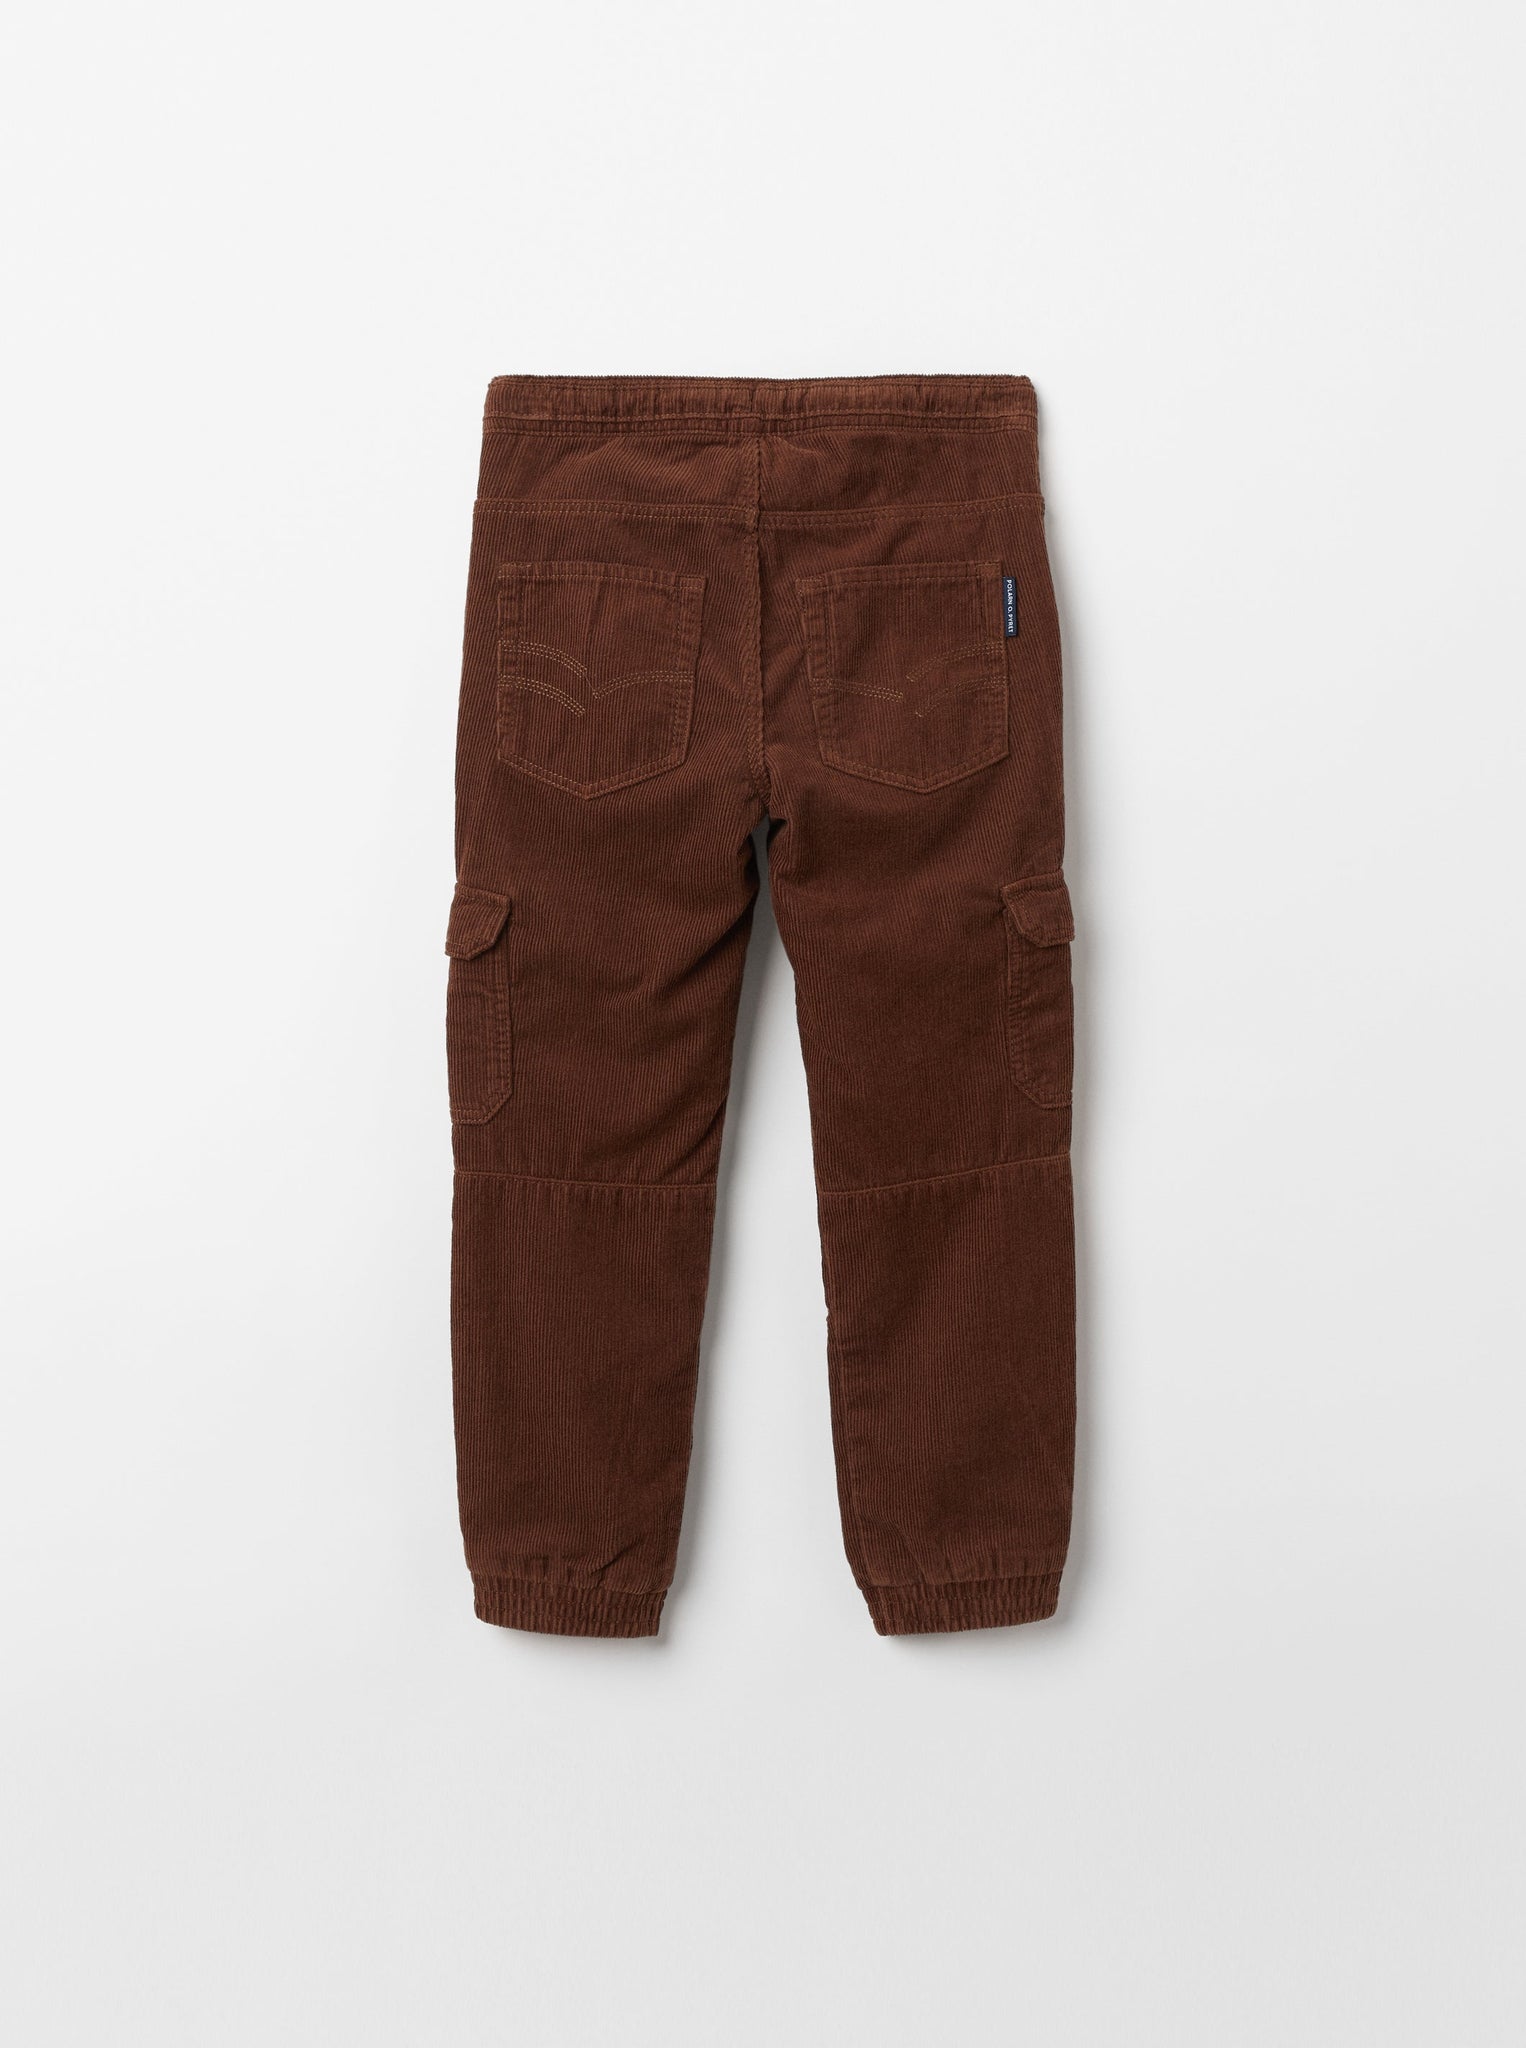 Organic Cotton Corduroy Kids Trousers from the Polarn O. Pyret kidswear collection. Clothes made using sustainably sourced materials.